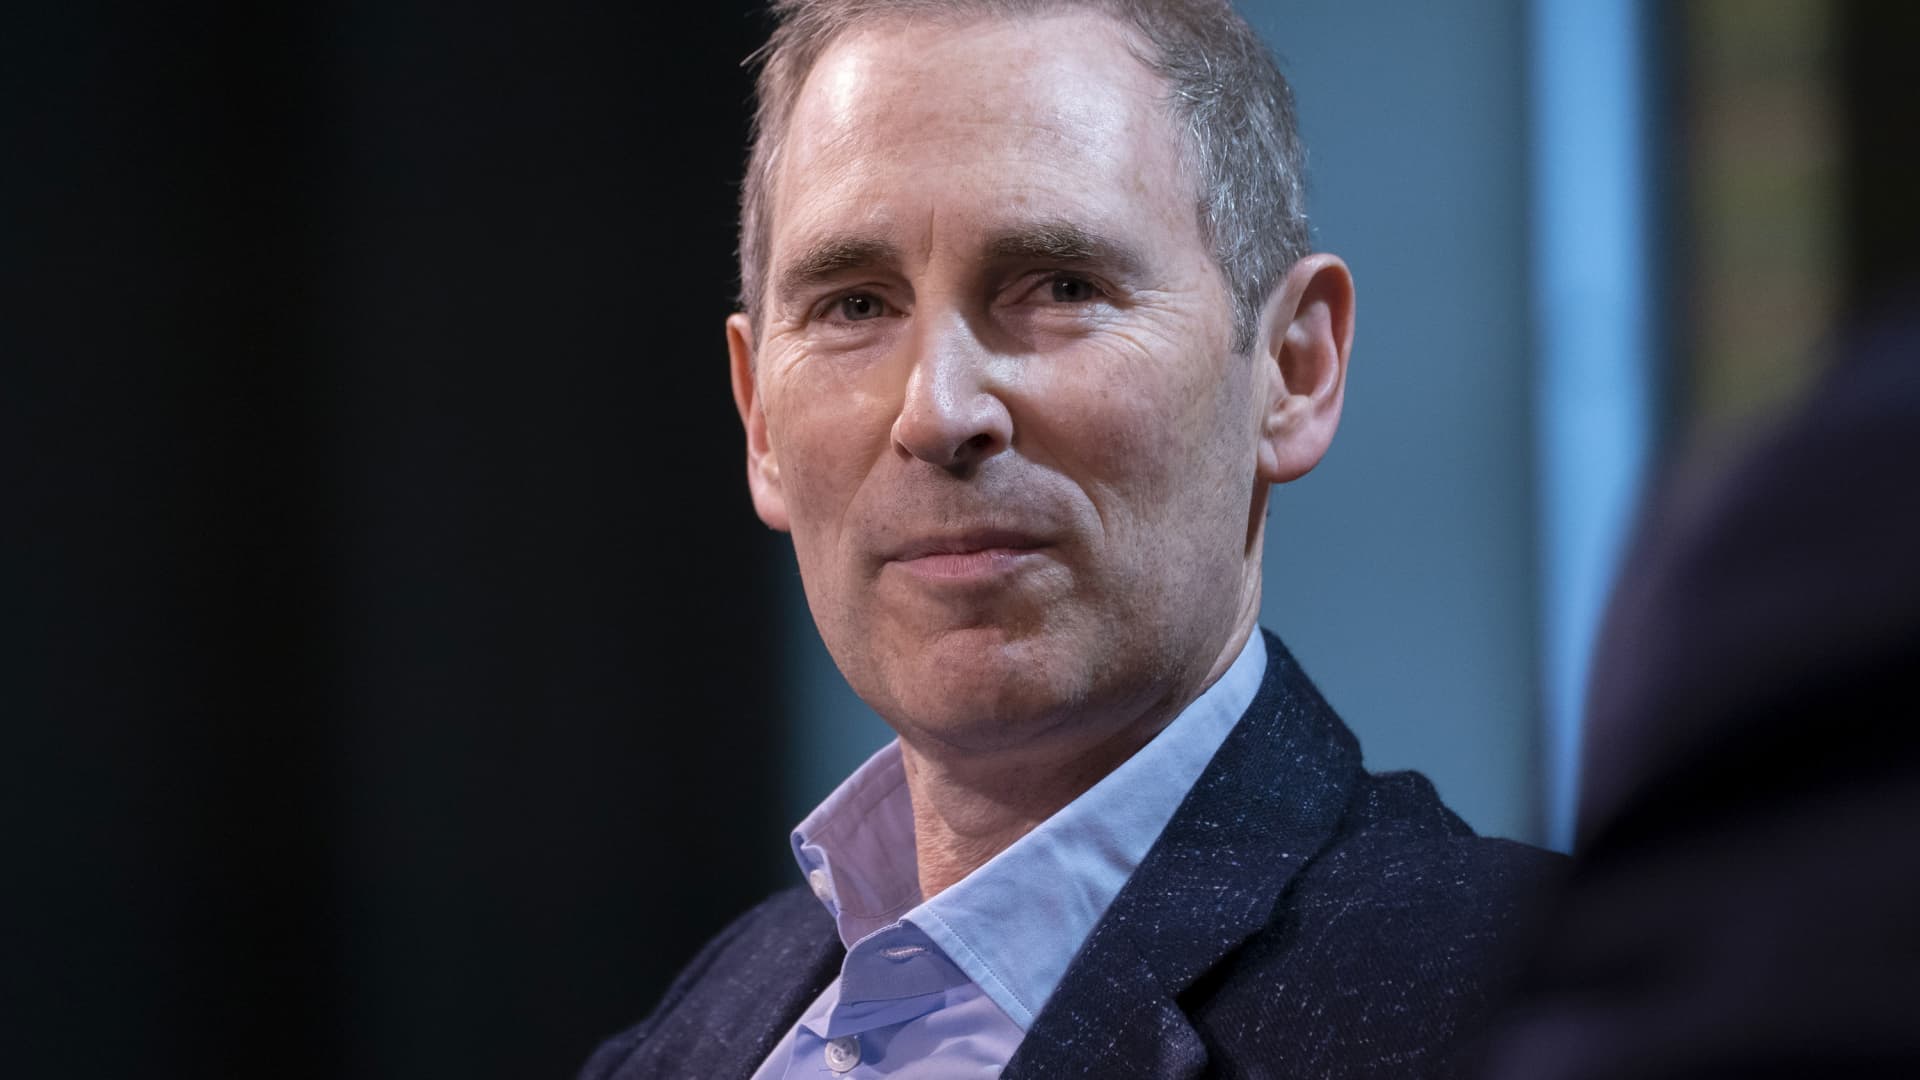 Andy Jassy says he won't force Amazon workers to return to the office